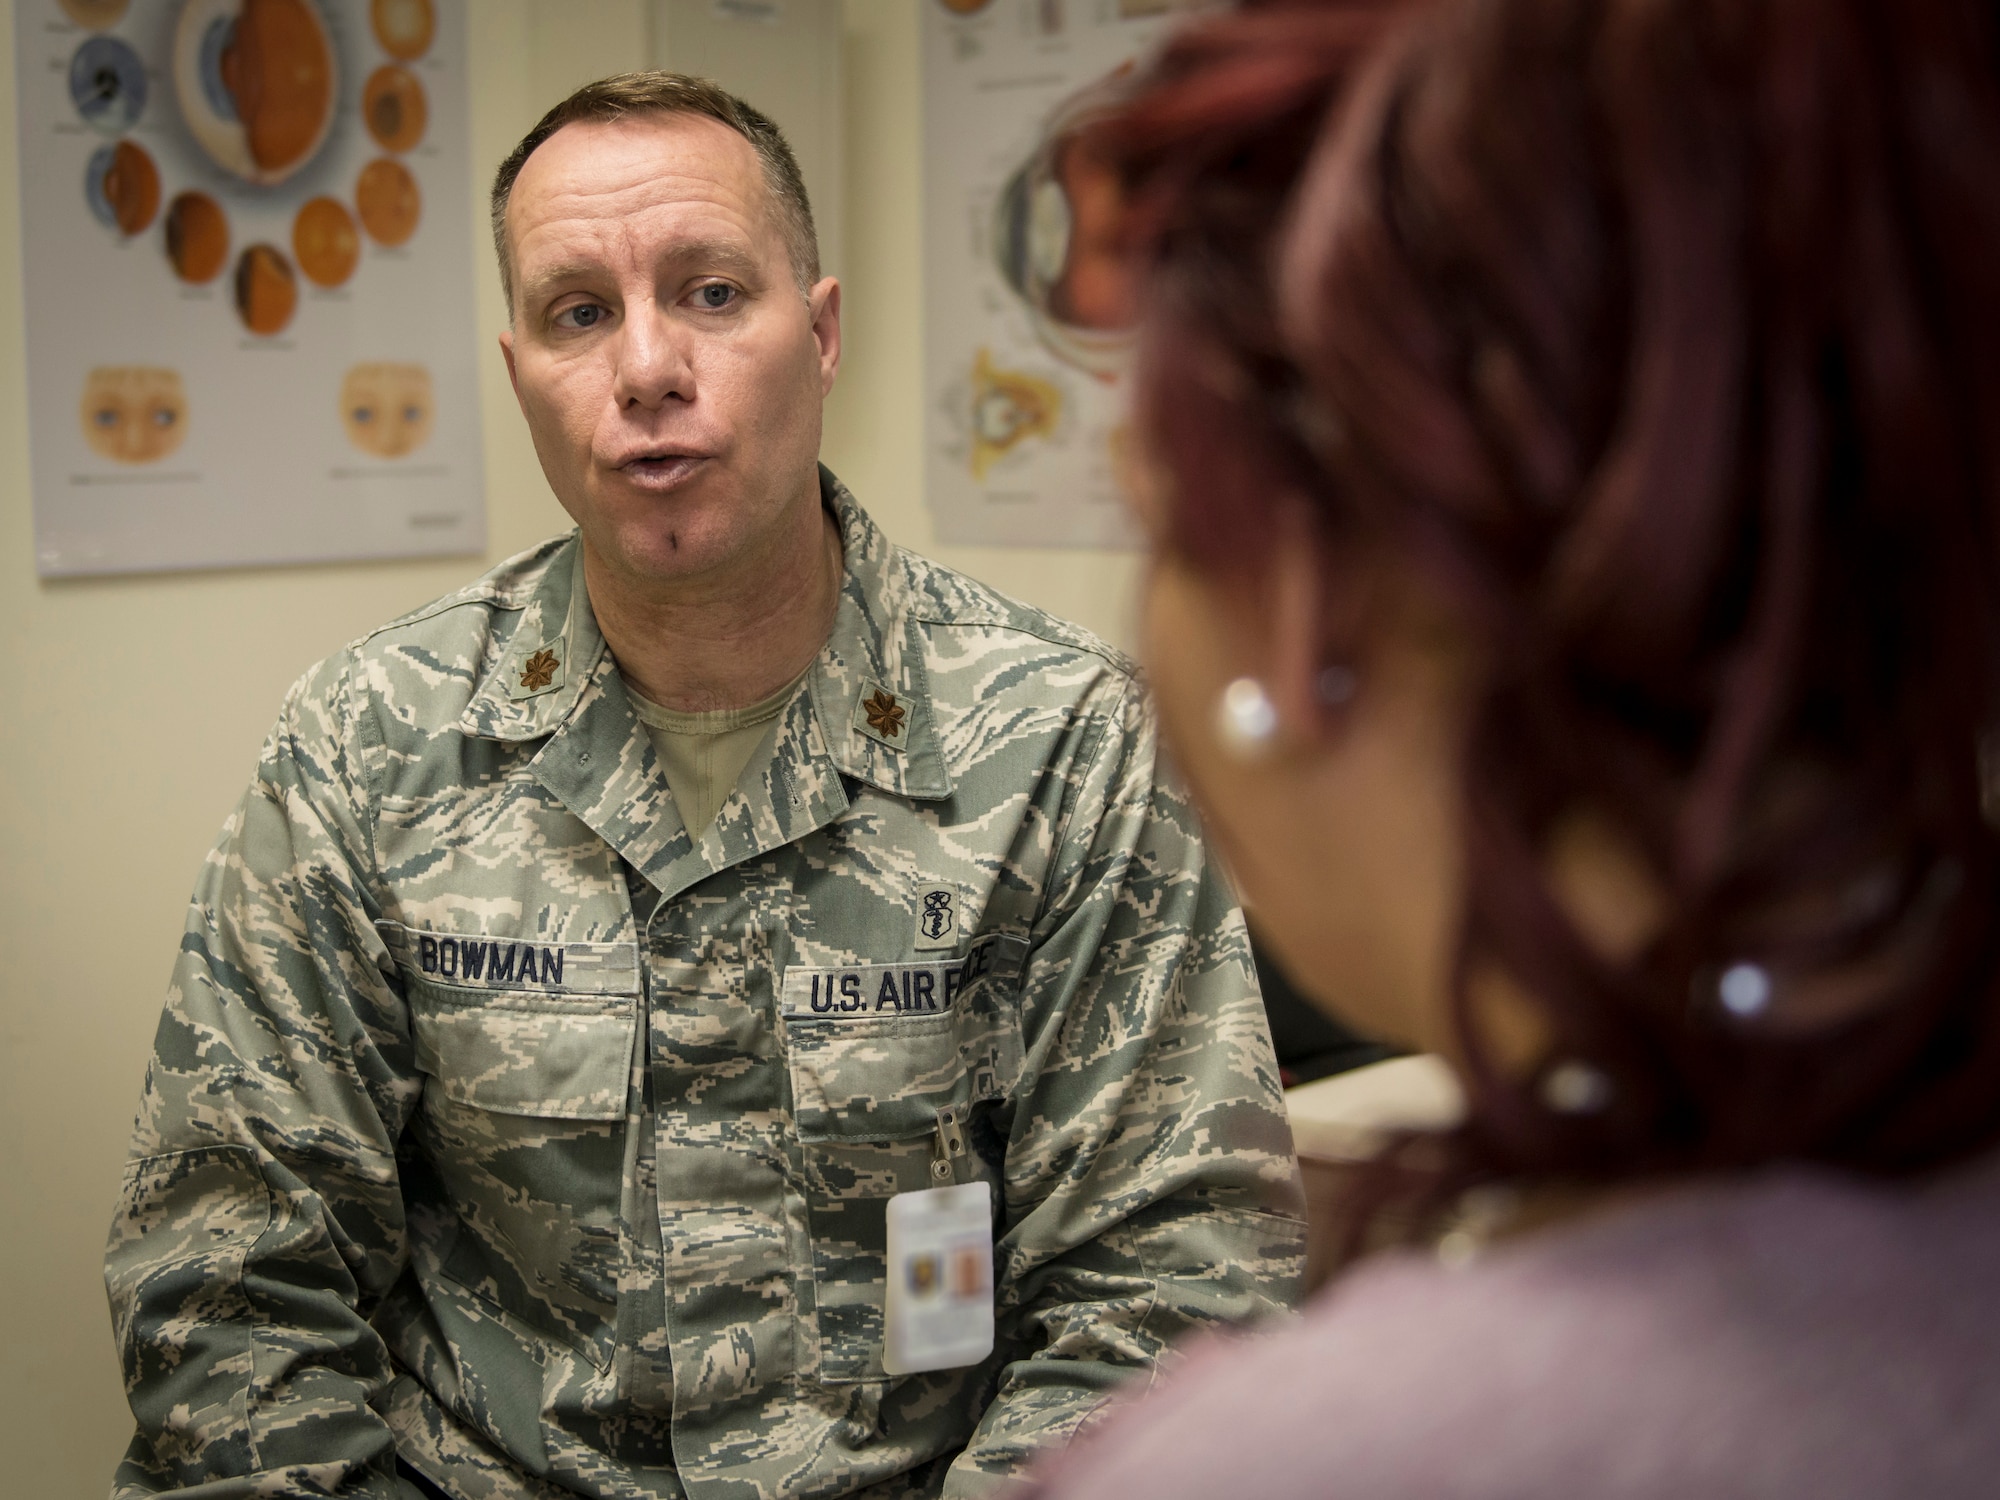 U.S. Air Force Maj. Ronny Bowman, an optometric physician with the 35th Aerospace Medicine Squadron, discusses with Tina Rueb, a child youth program assistant with the Lunney Youth Center, the health and wellness of her eyes at Misawa Air Base, Japan, Jan. 21, 2016. Routine eye exams offer patients a prescription for glasses if they need them and is more than a simple vision screening test typically conducted by their primary care doctor. A prescription for contact lenses requires a separate exam. Optometry also provides optional well-child eye exams every two years between the ages of three and six and also include a screening for lazy eye and crossed eyes. These exams are provided by an optometrist or ophthalmologist. Bowman hails from Paris, Arkansas, and Reub is a Clovis, New Mexico, native. (U.S. Air Force photo by Staff Sgt. Benjamin W. Stratton)